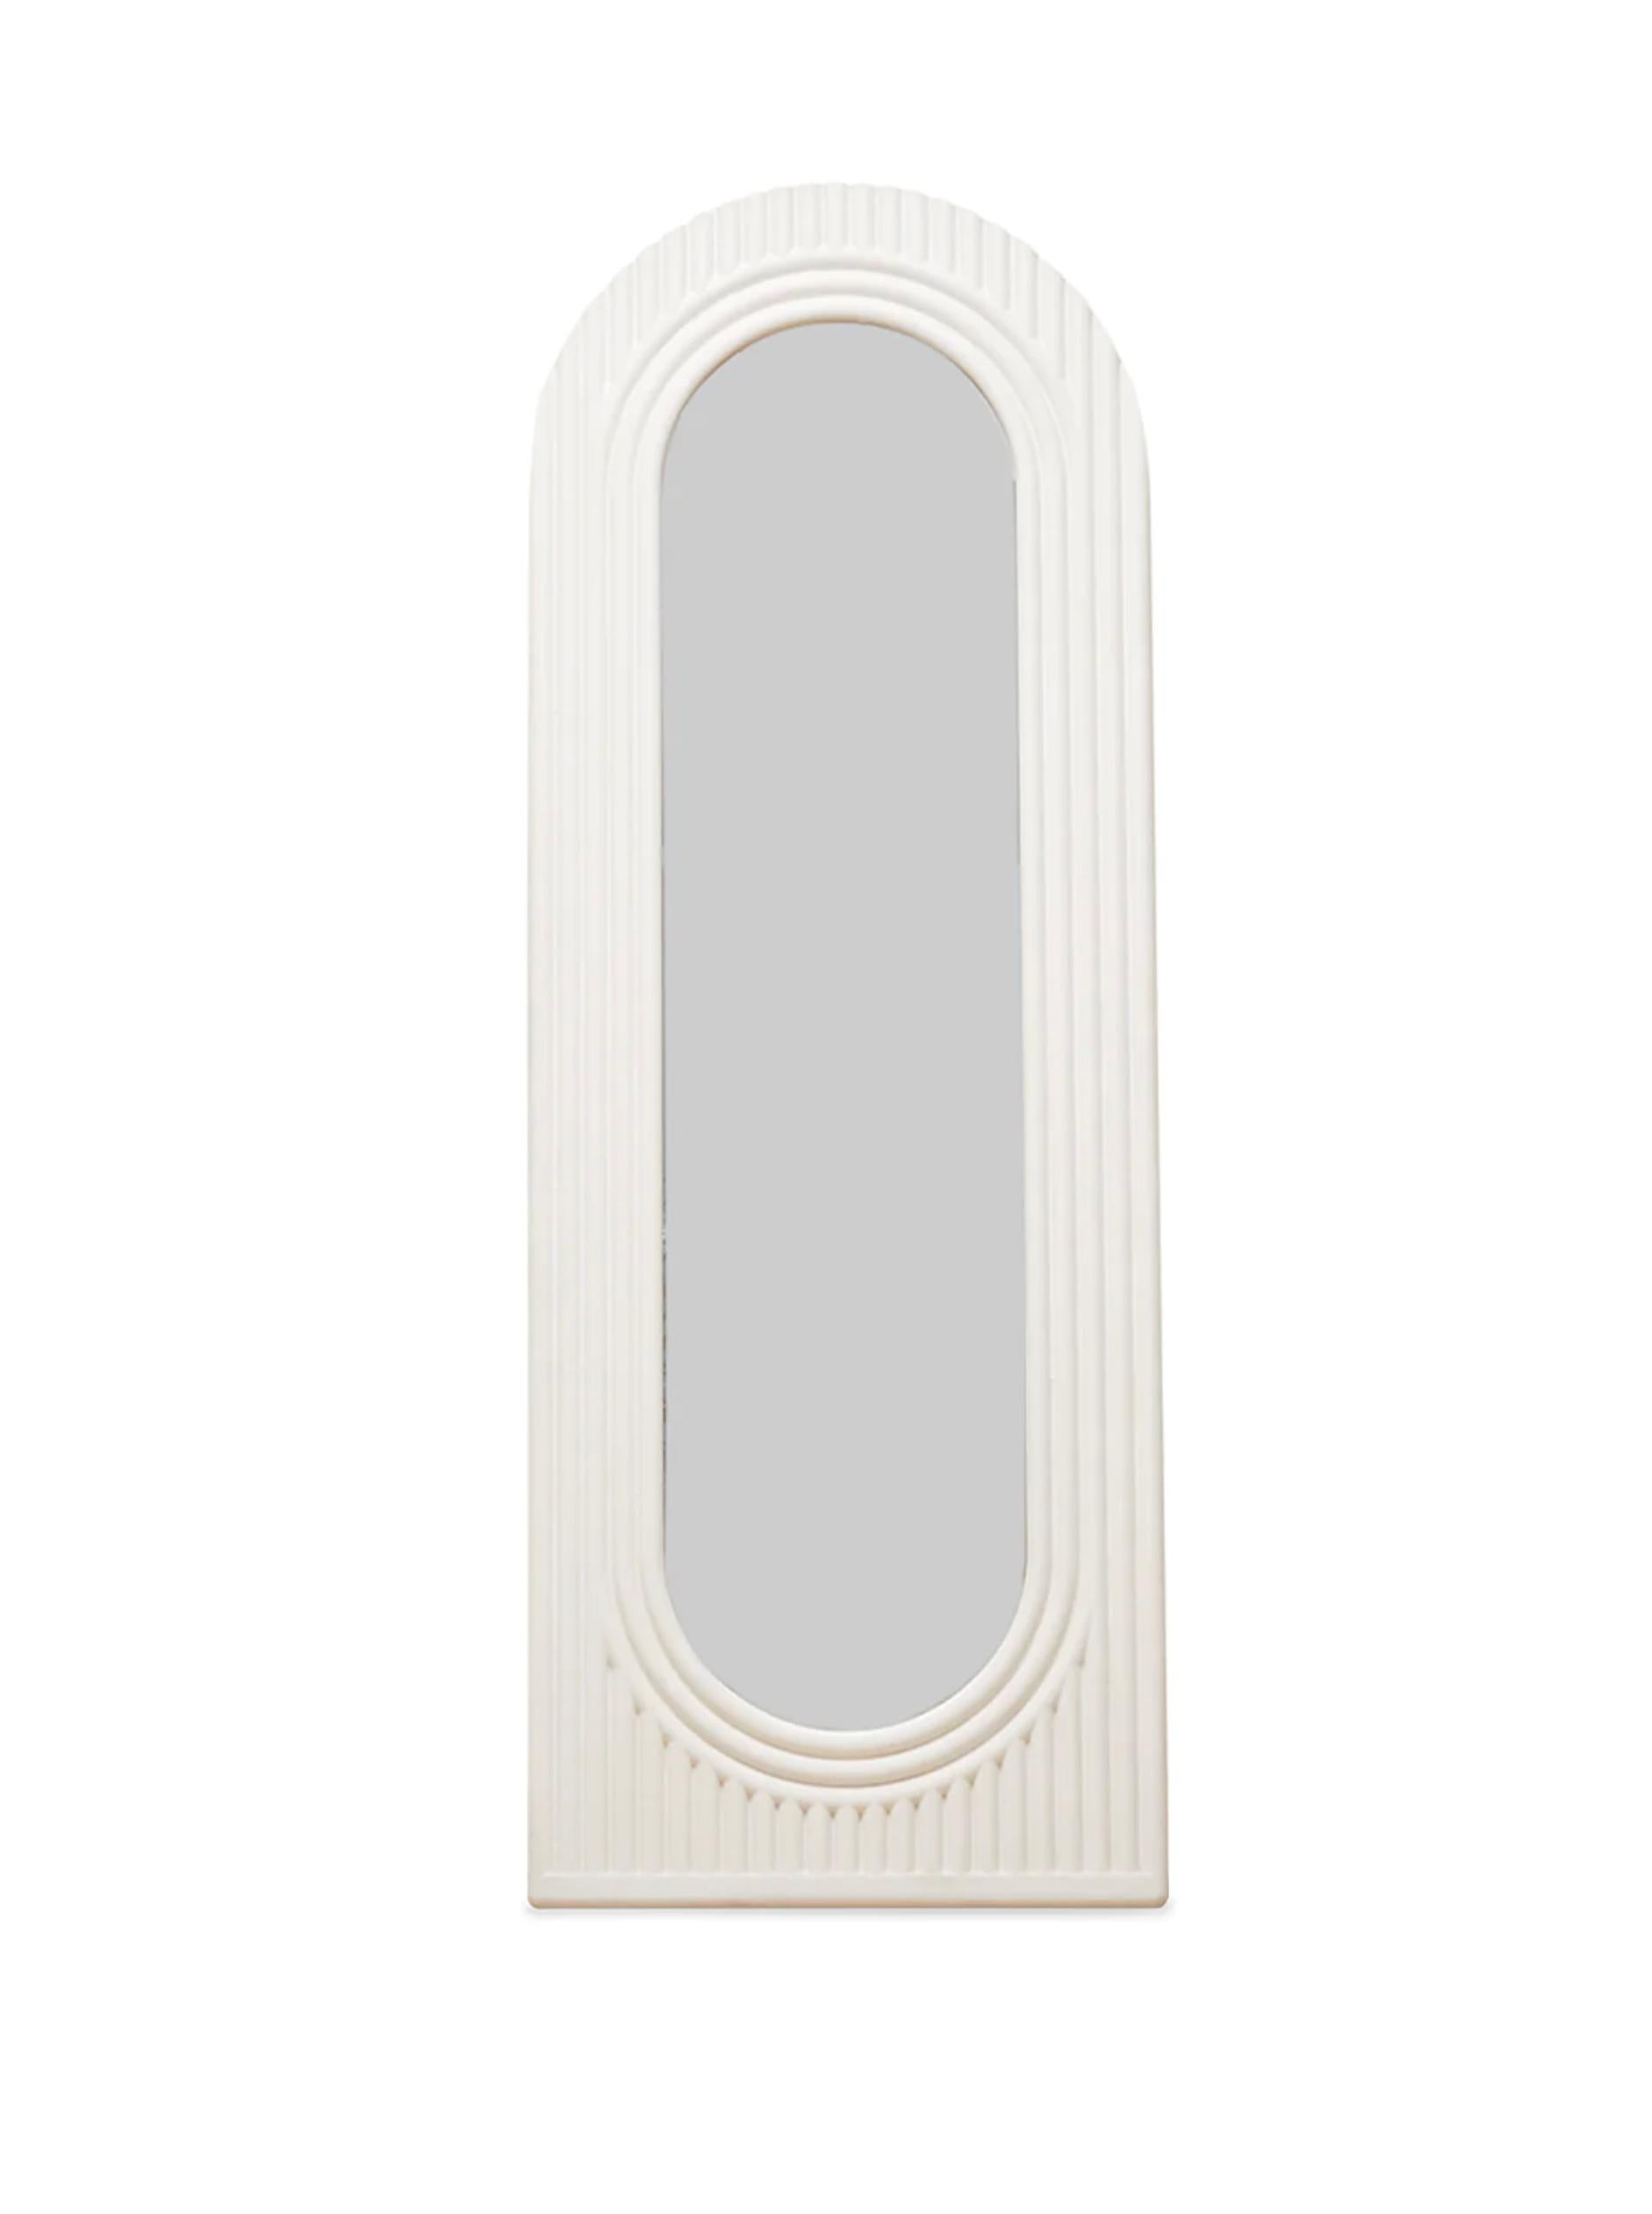 This minimalist hand-cast reinforced gypsum mirror is a top-quality Ian C.R. Martin Studio piece. It features a striking, concentric design using a backcasting method that integrates the mirror seamlessly into its plaster frame.  The plaster is